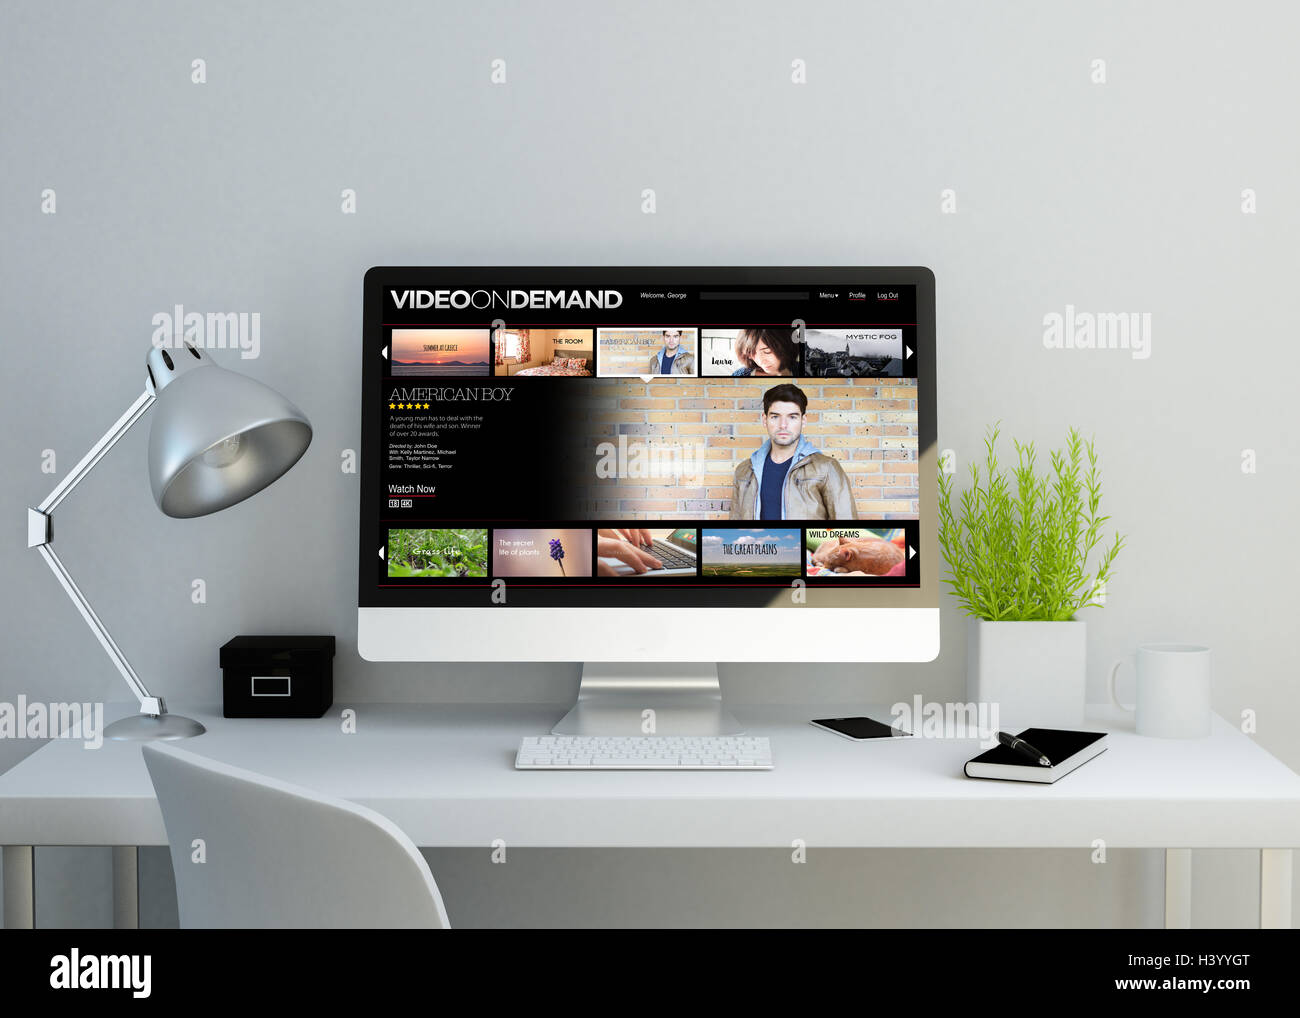 modern clean workspace mockup with video on demand website on screen